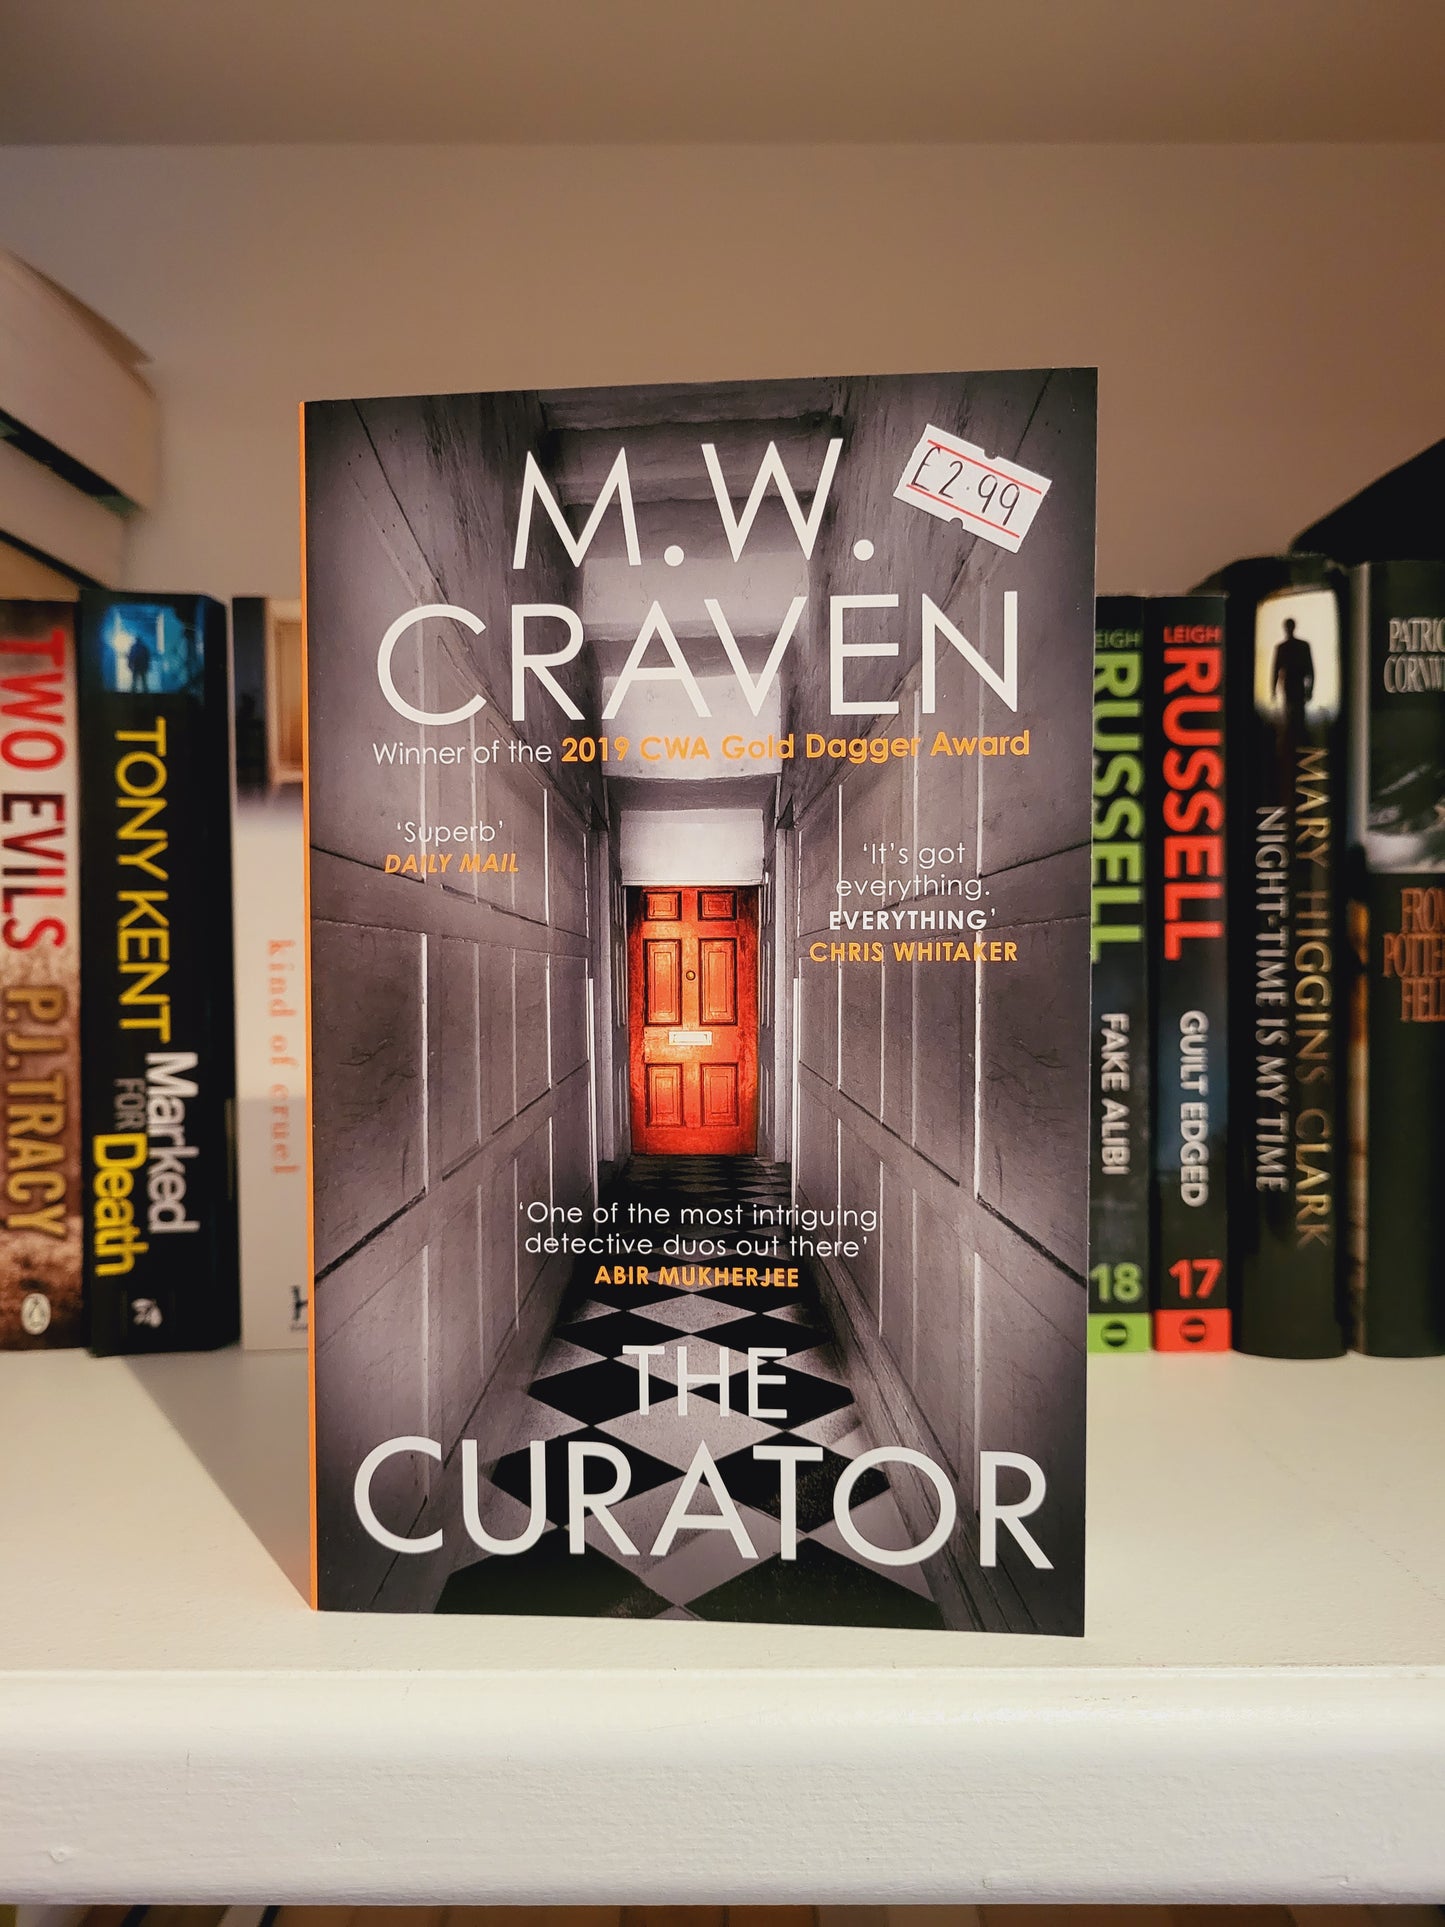 The Curator - M. W. Craven